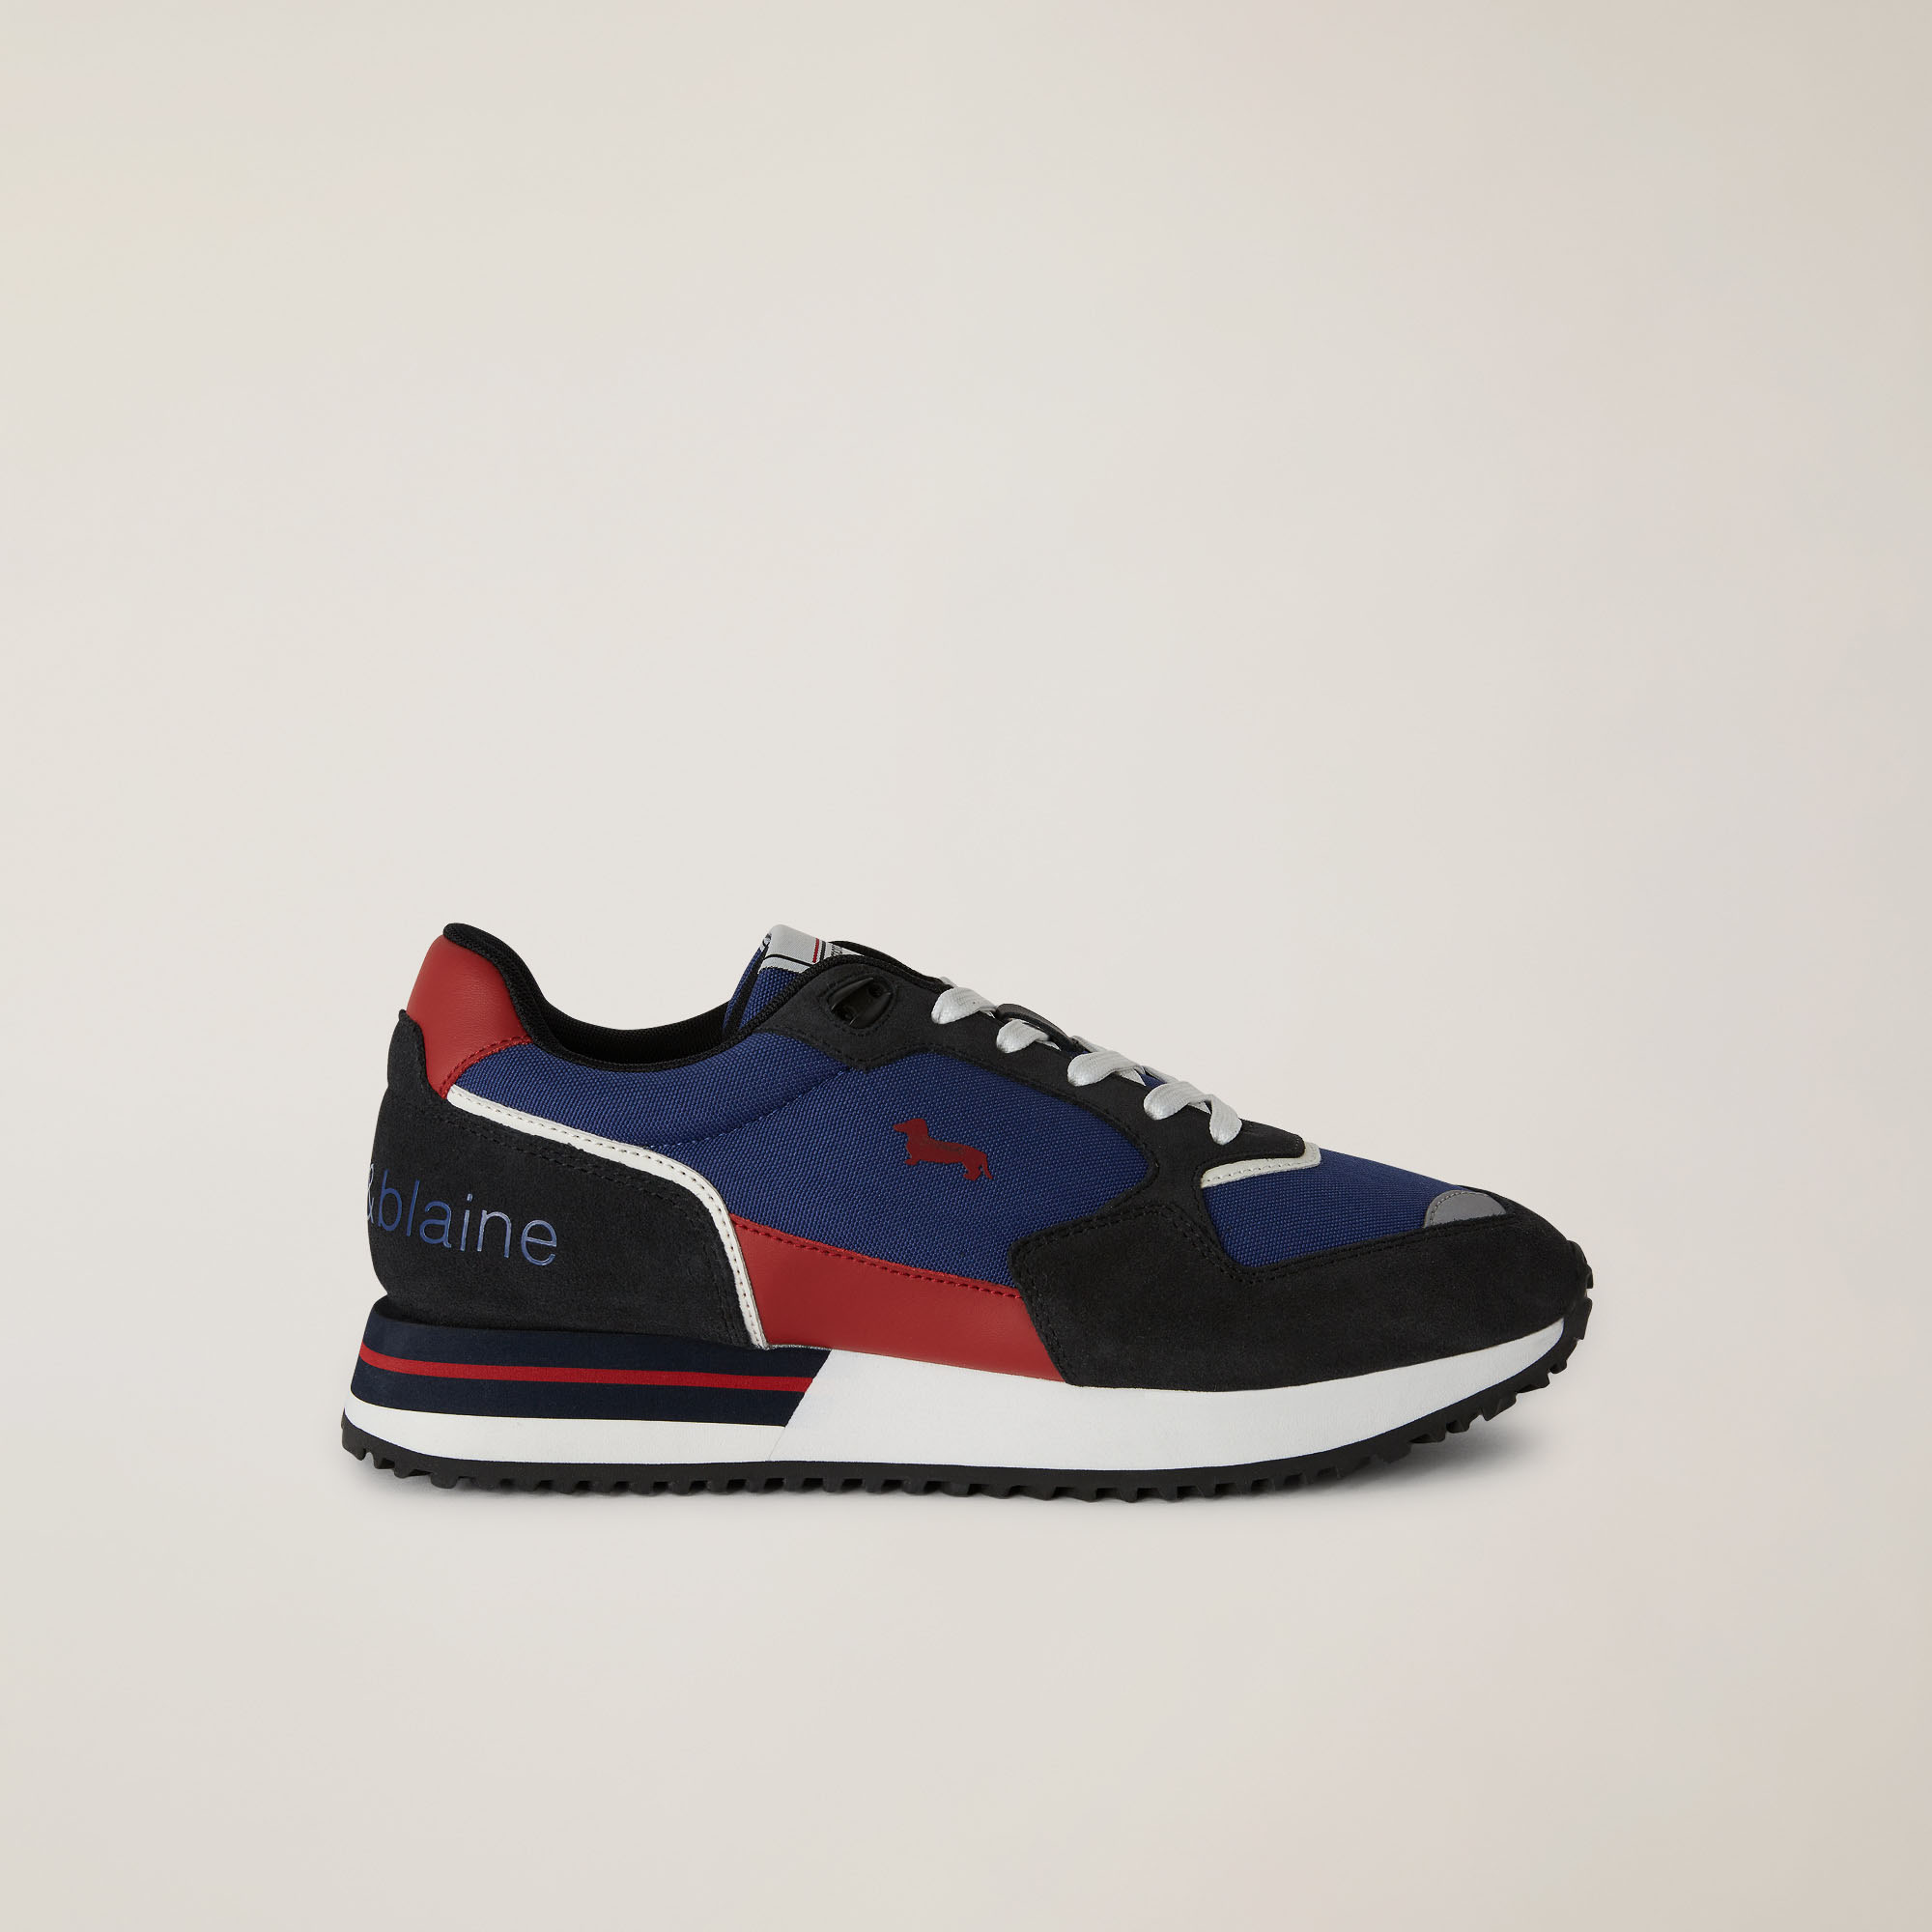 Sneakers With Contrasting Inserts, Blue/Red, large